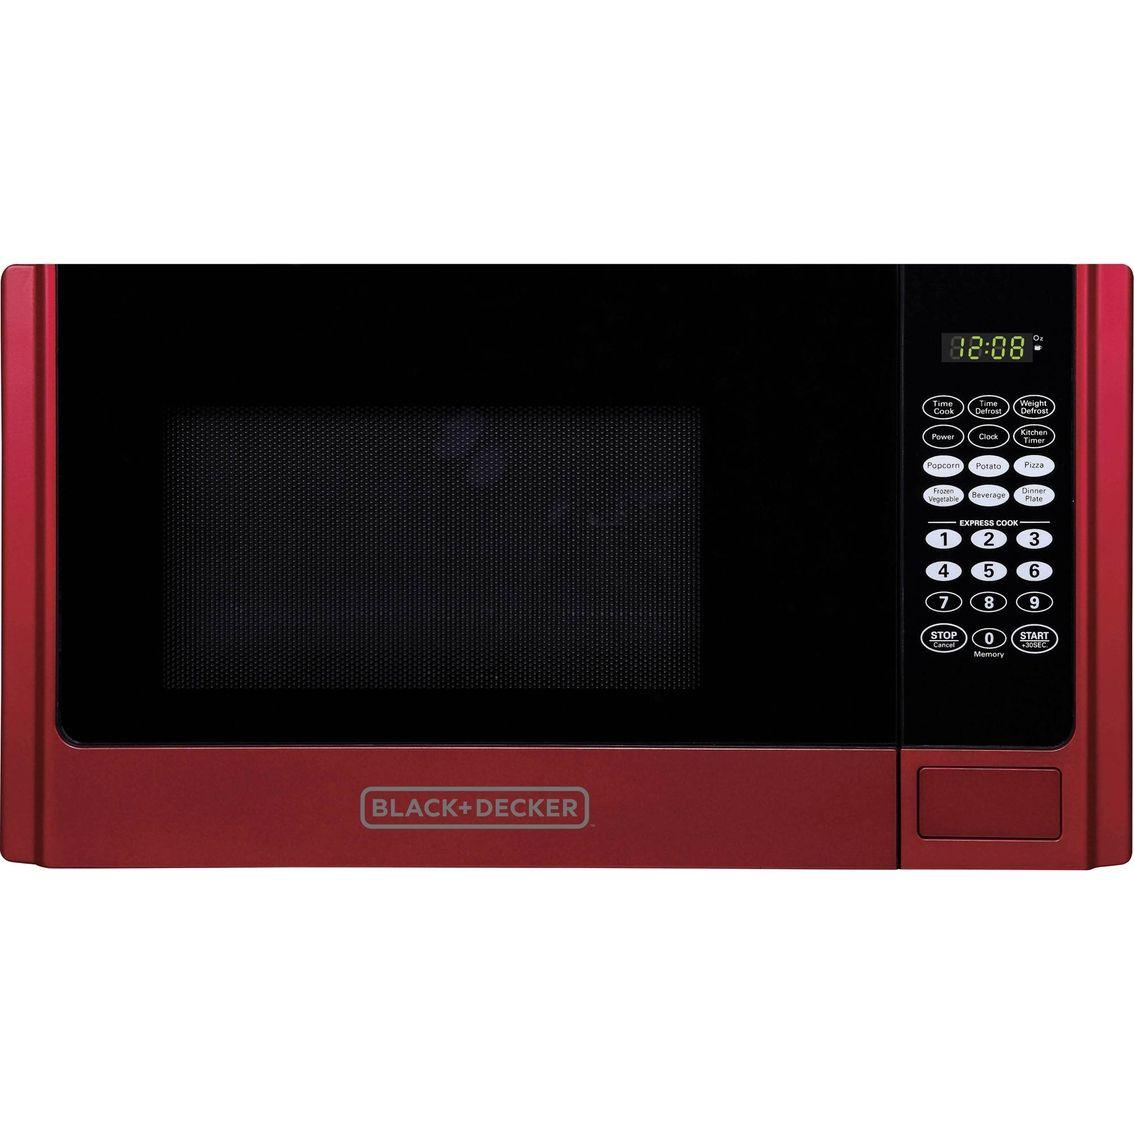 Red and Black Appliance Logo - Black & Decker 0.9 Cu. Ft. Microwave Oven. Microwave Ovens. Home